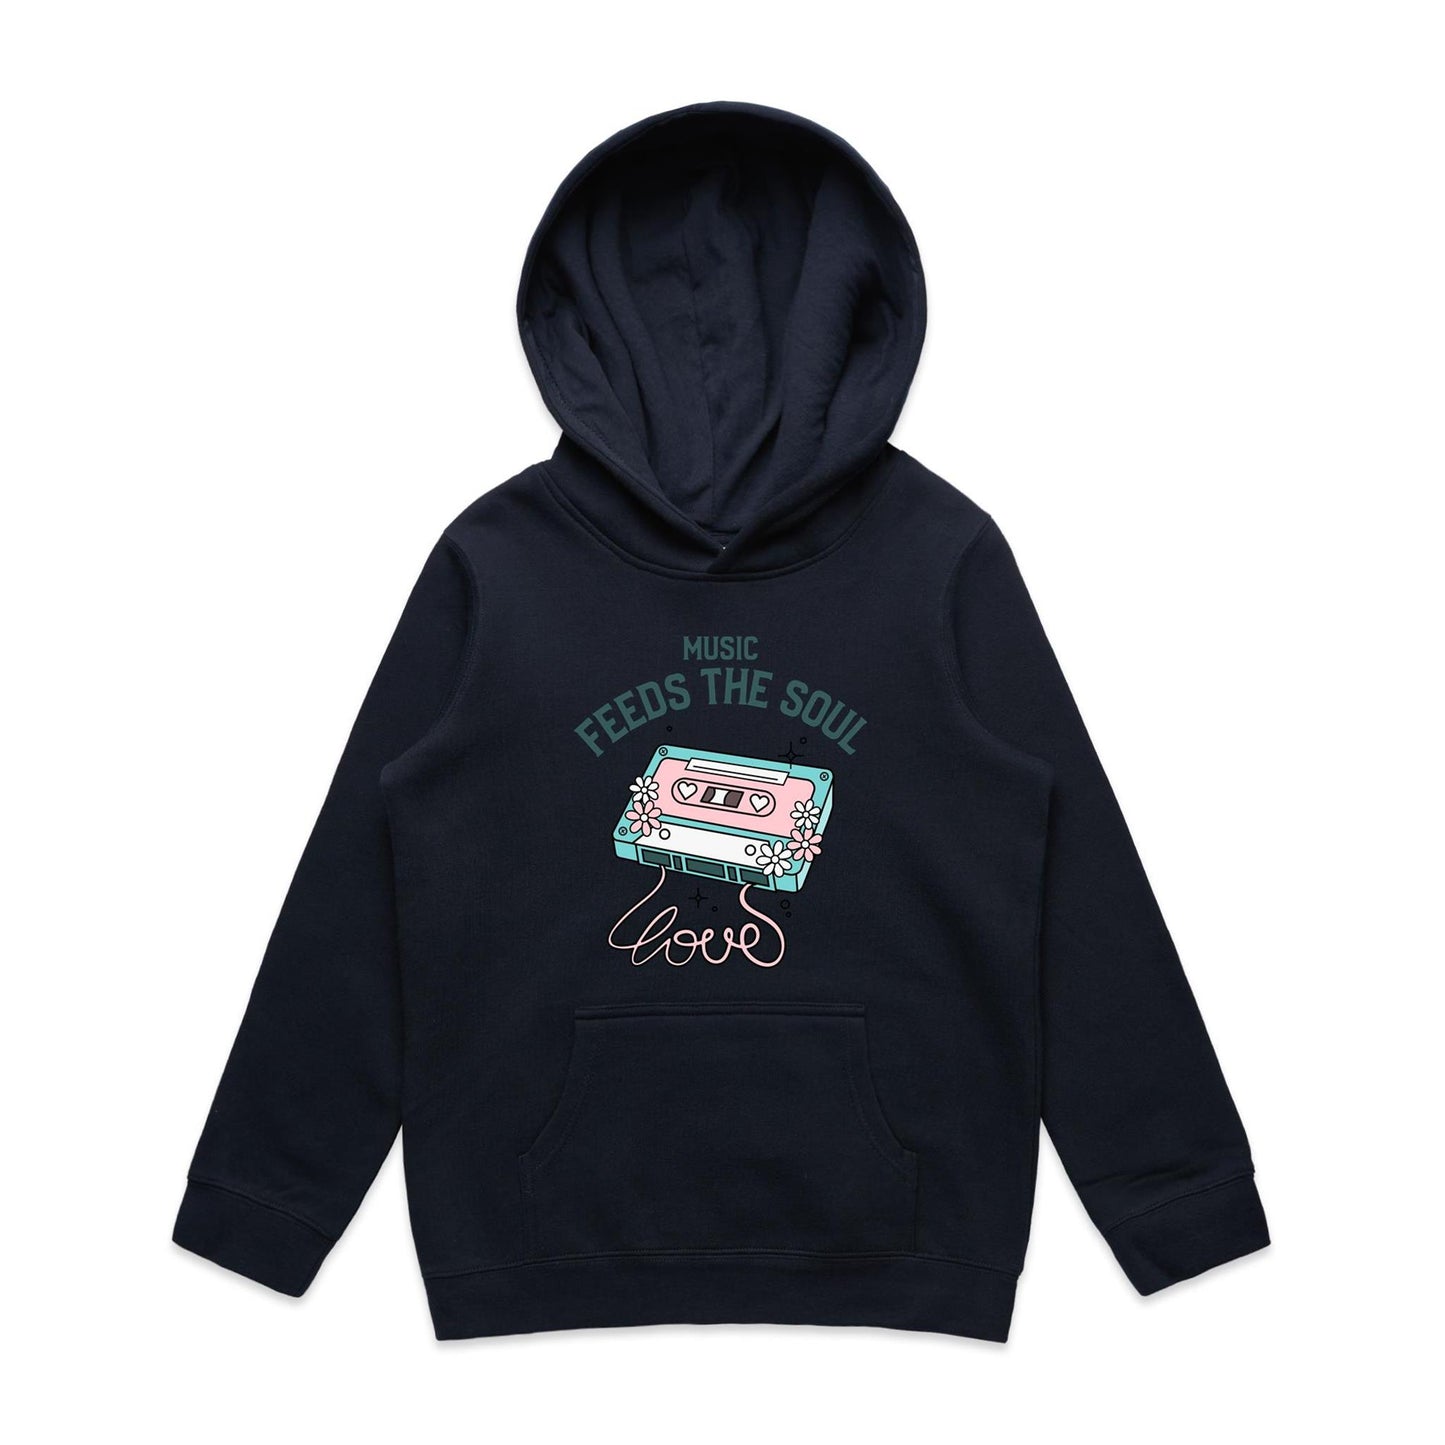 Music Feeds The Soul, Cassette Tape - Youth Supply Hood Navy Kids Hoodie Music Retro